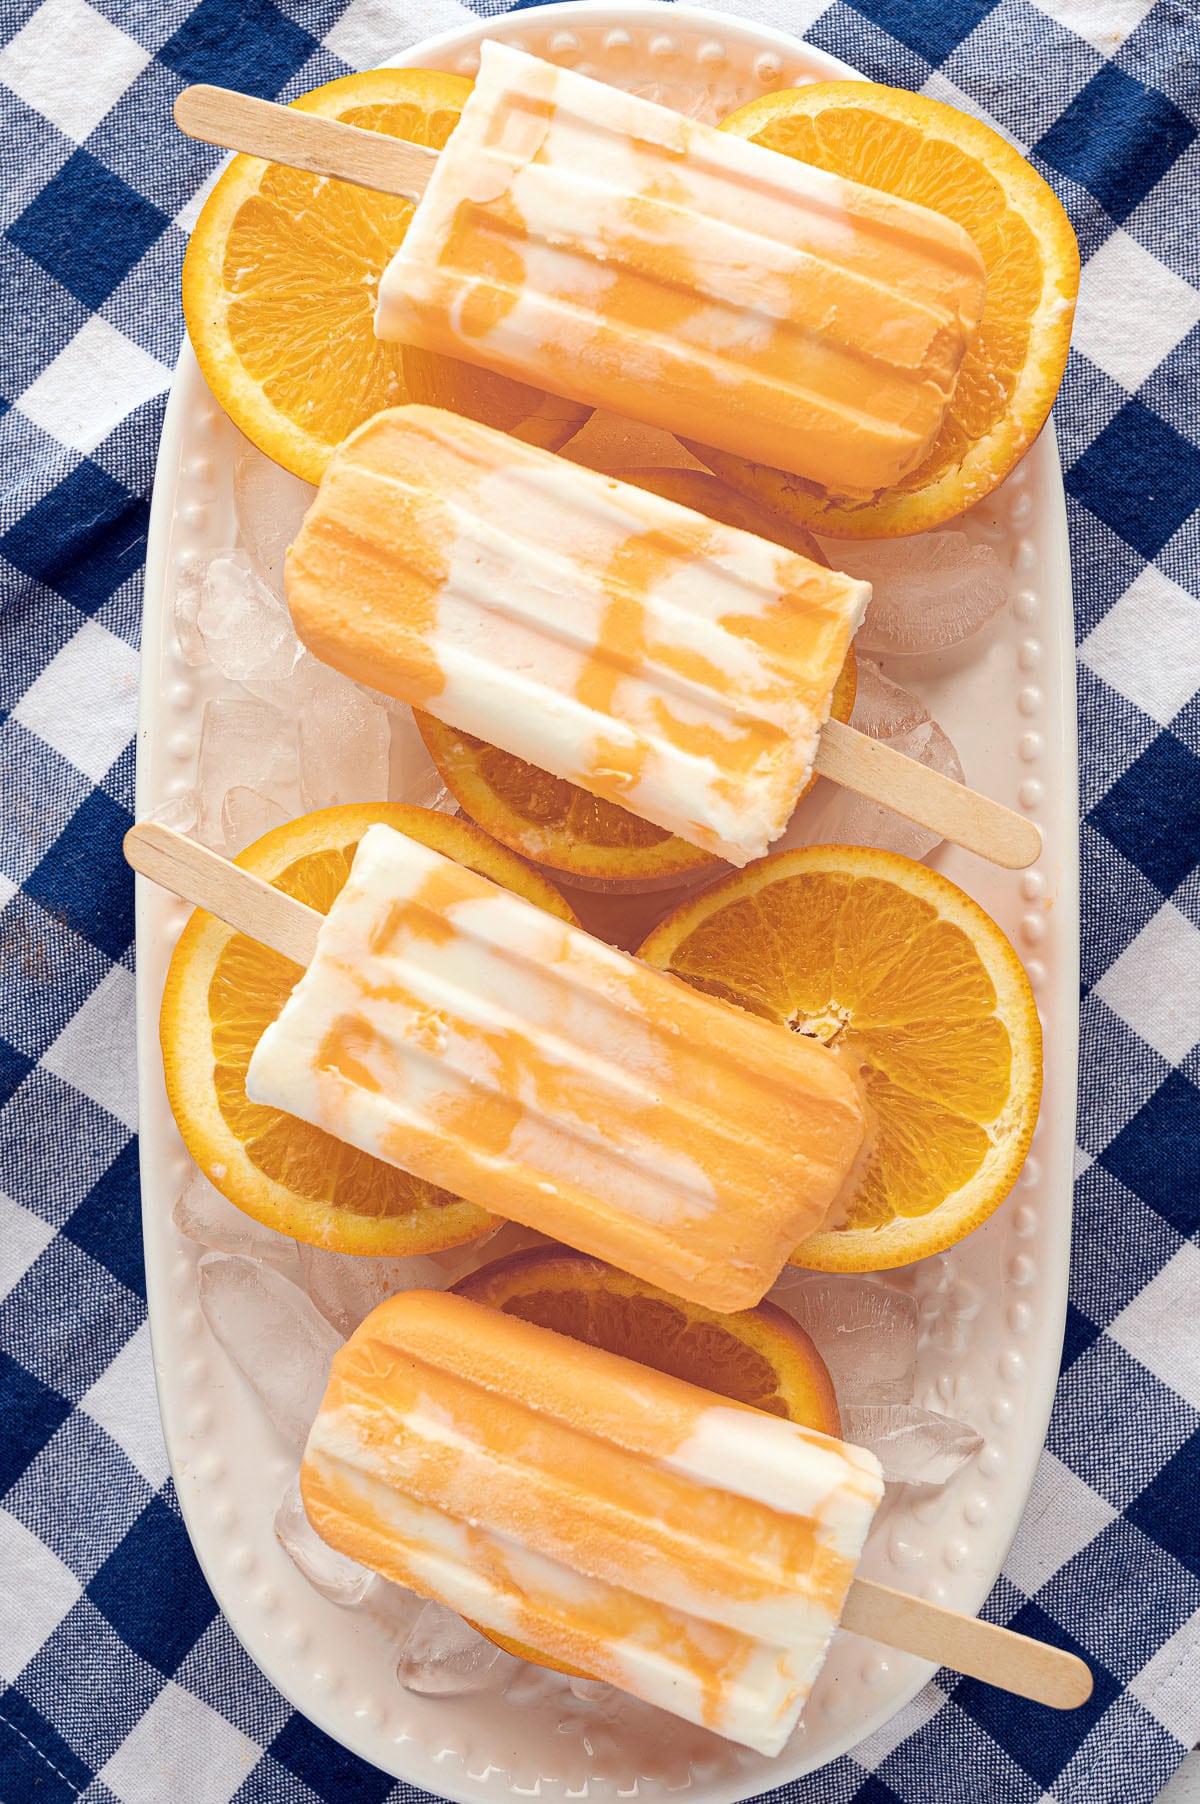 Orange and white marbled sugar free creamsicle popsicles resting on a white platter on top of a blue gingham table cloth